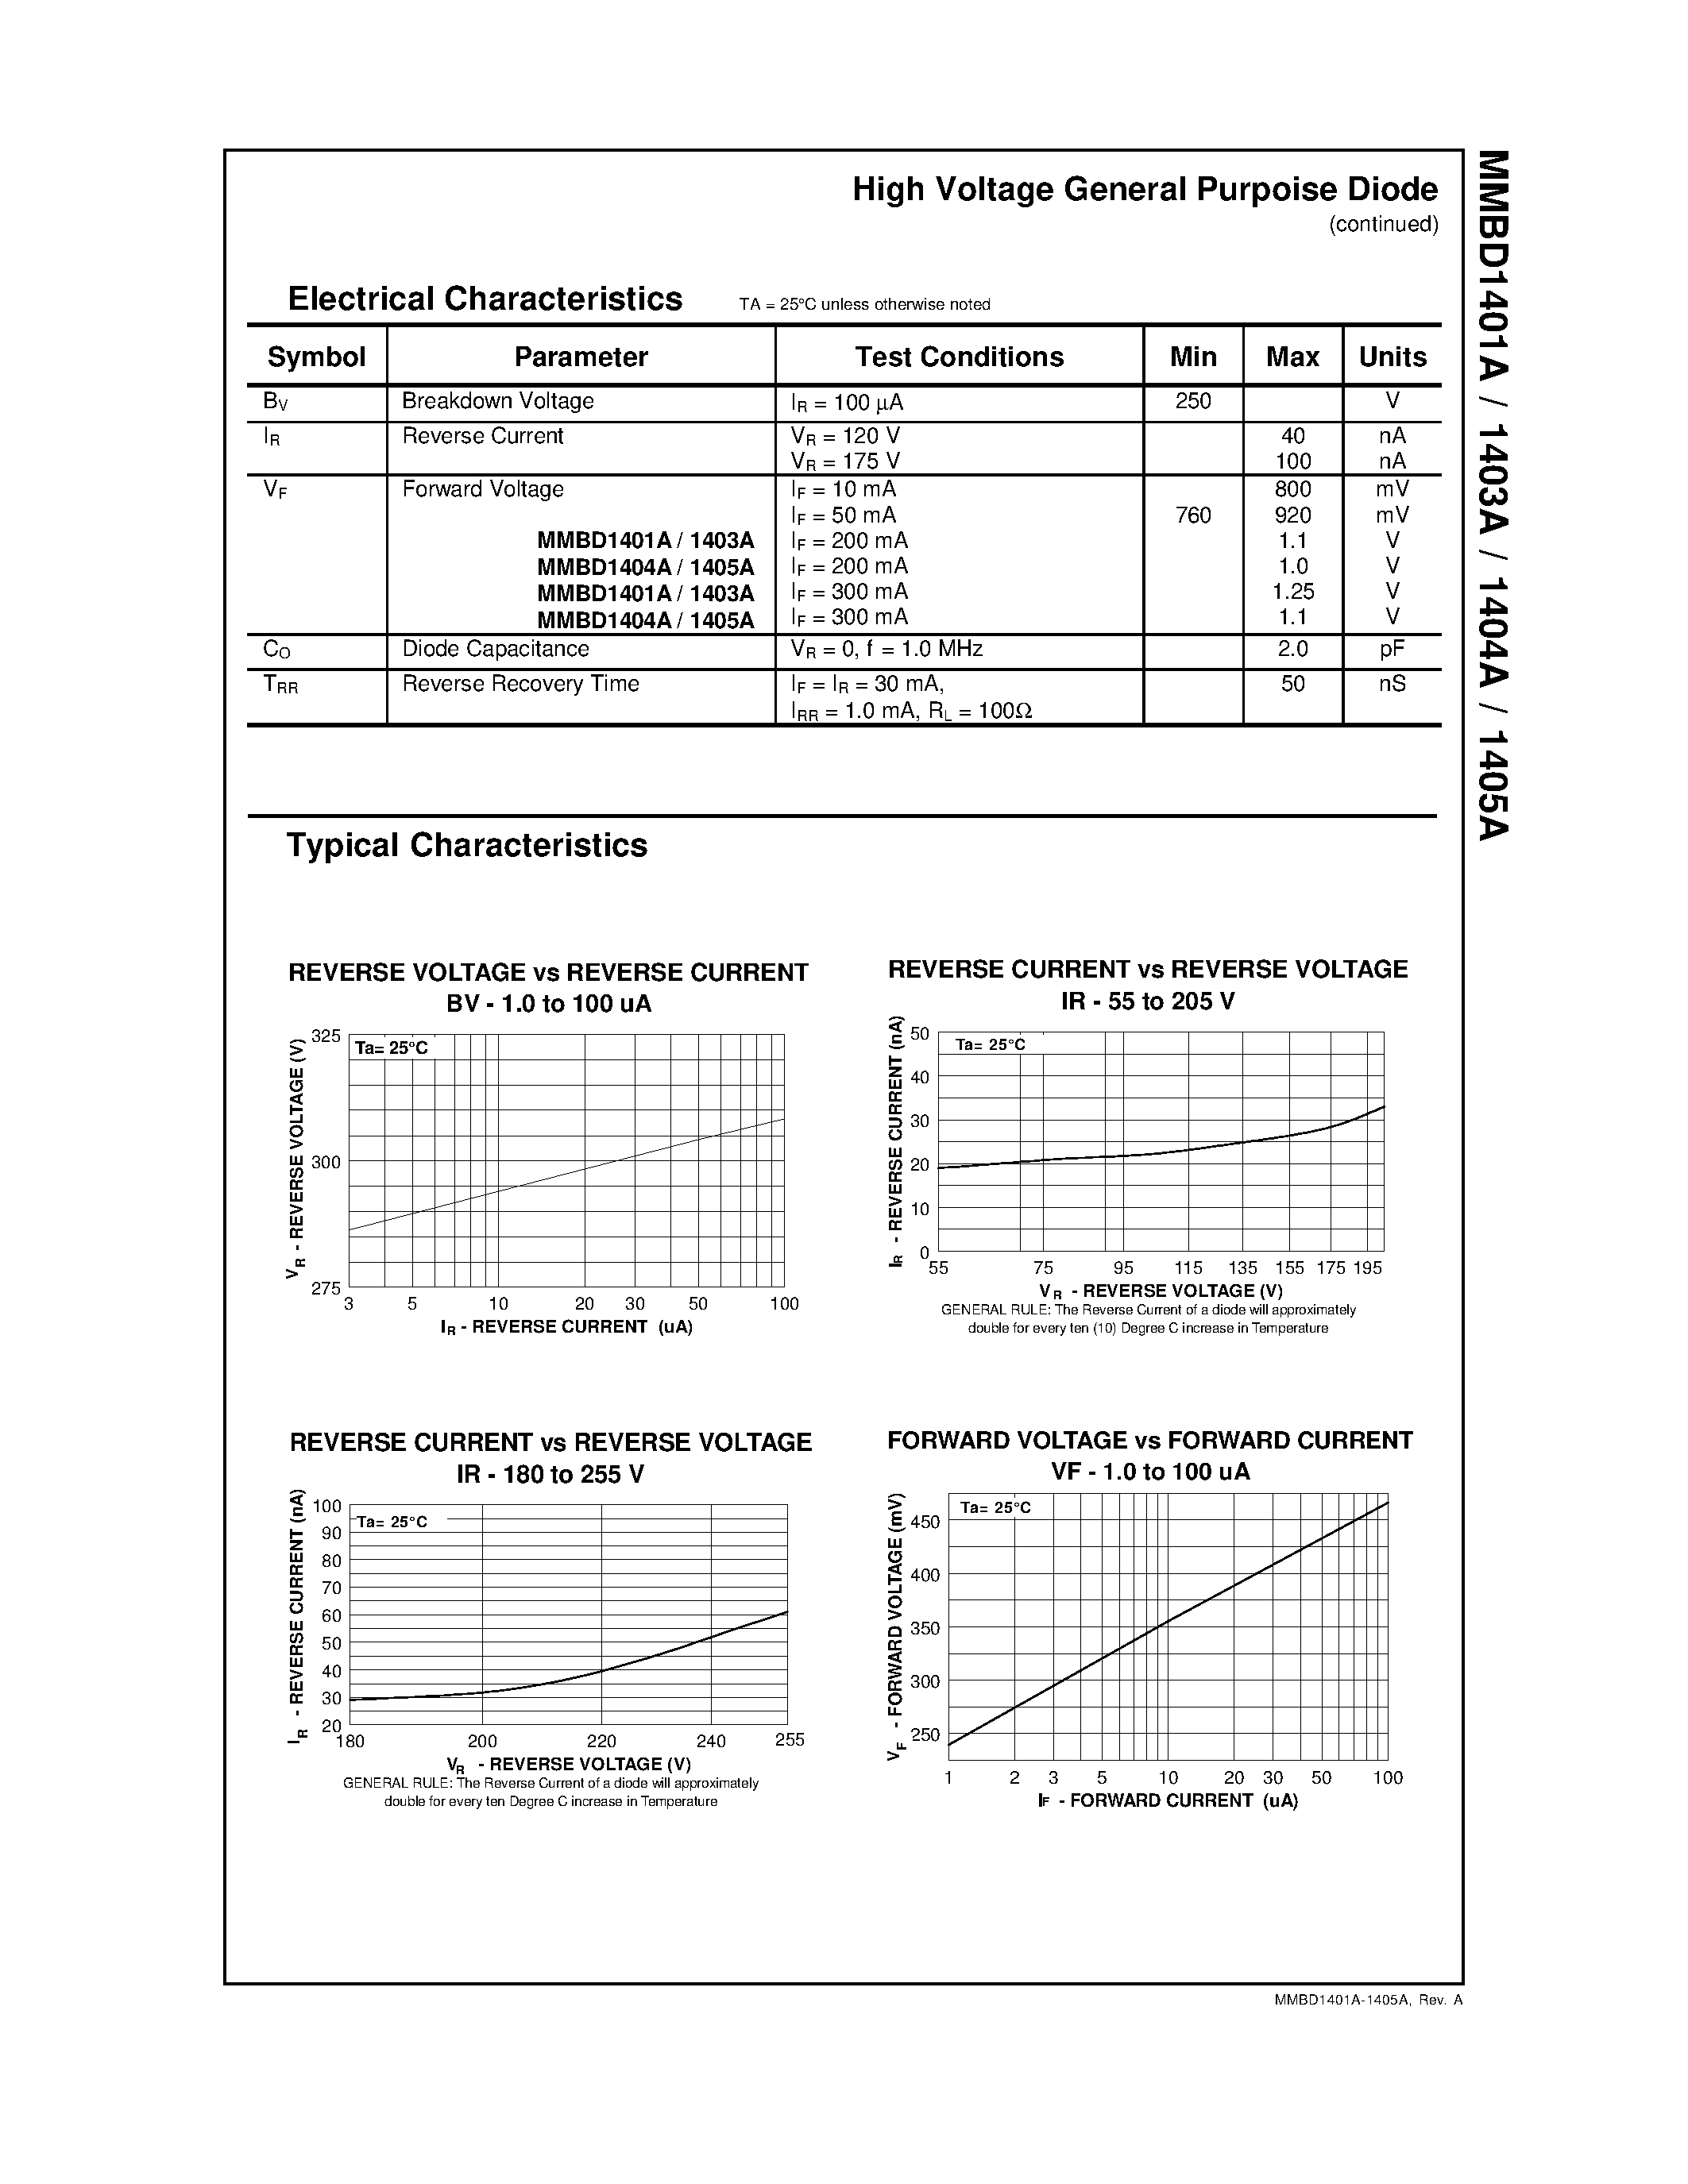 Datasheet MMBD1403A - High Voltage General Purpose Diode page 2